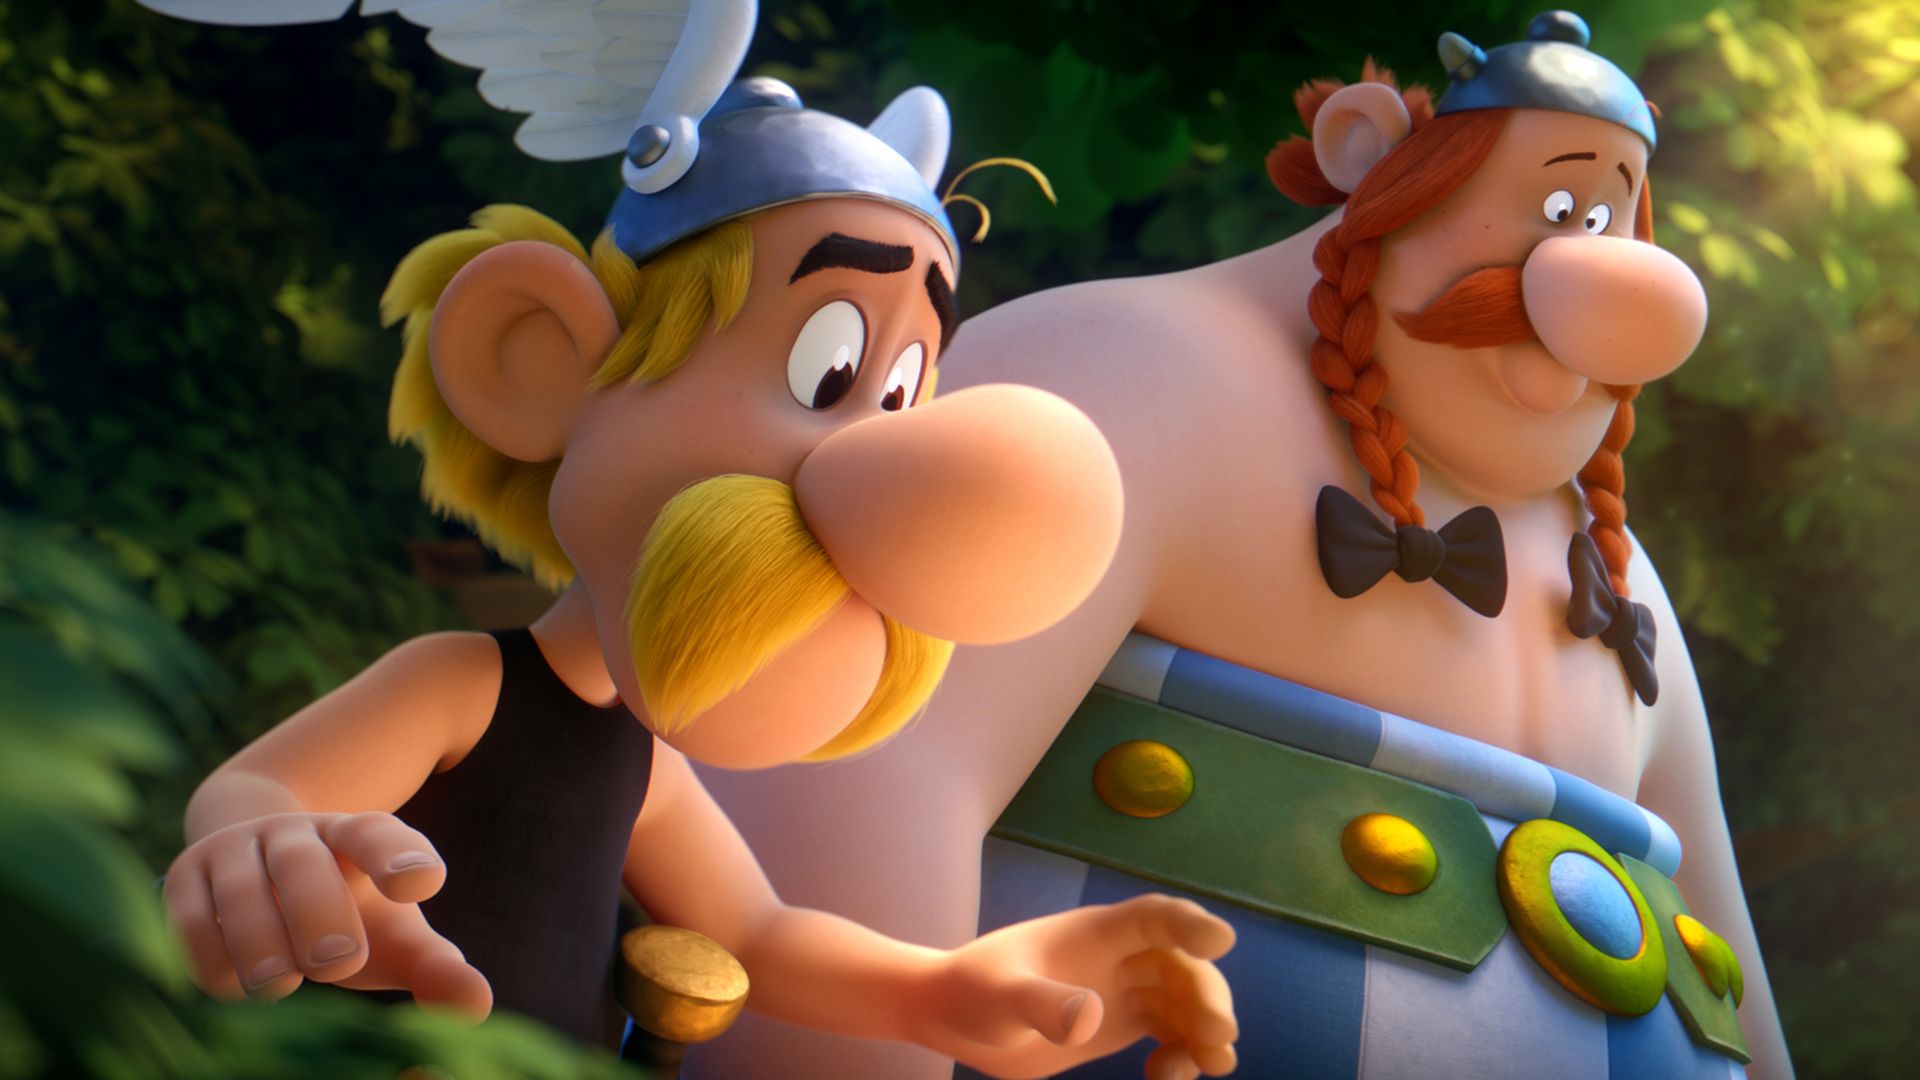 Asterix: The Secret of the Magic Potion background